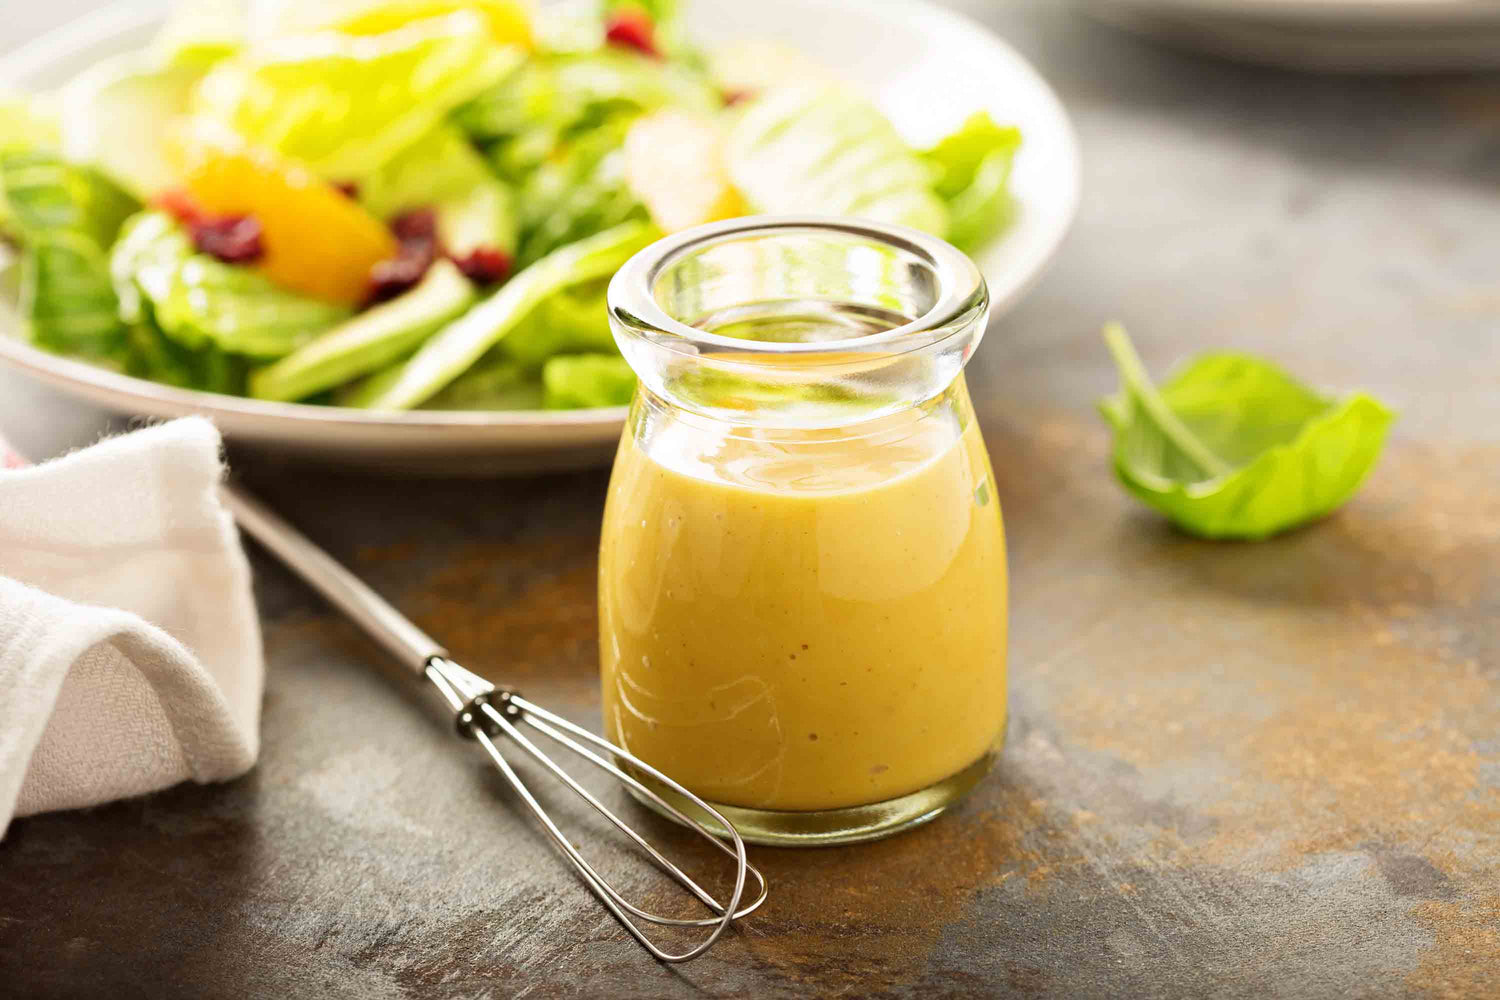 Another Favorite Salad Dressing